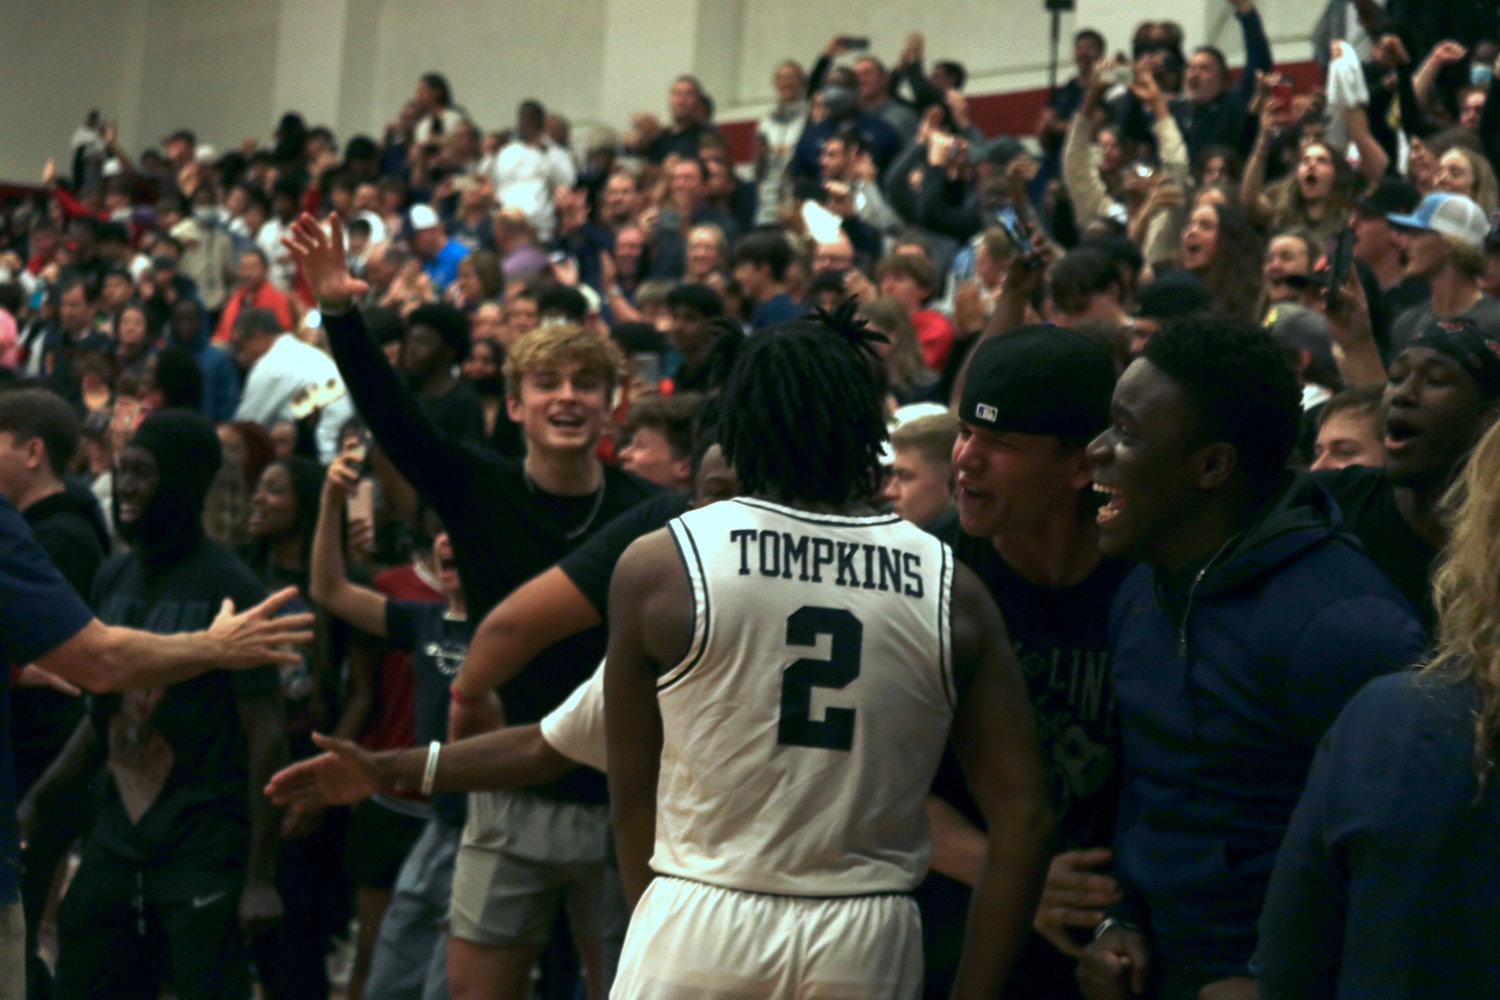 Tompkins’ Nick Lancit celebrates with fans after Wednesday’s game against Seven Lakesat the Tompkins gym.